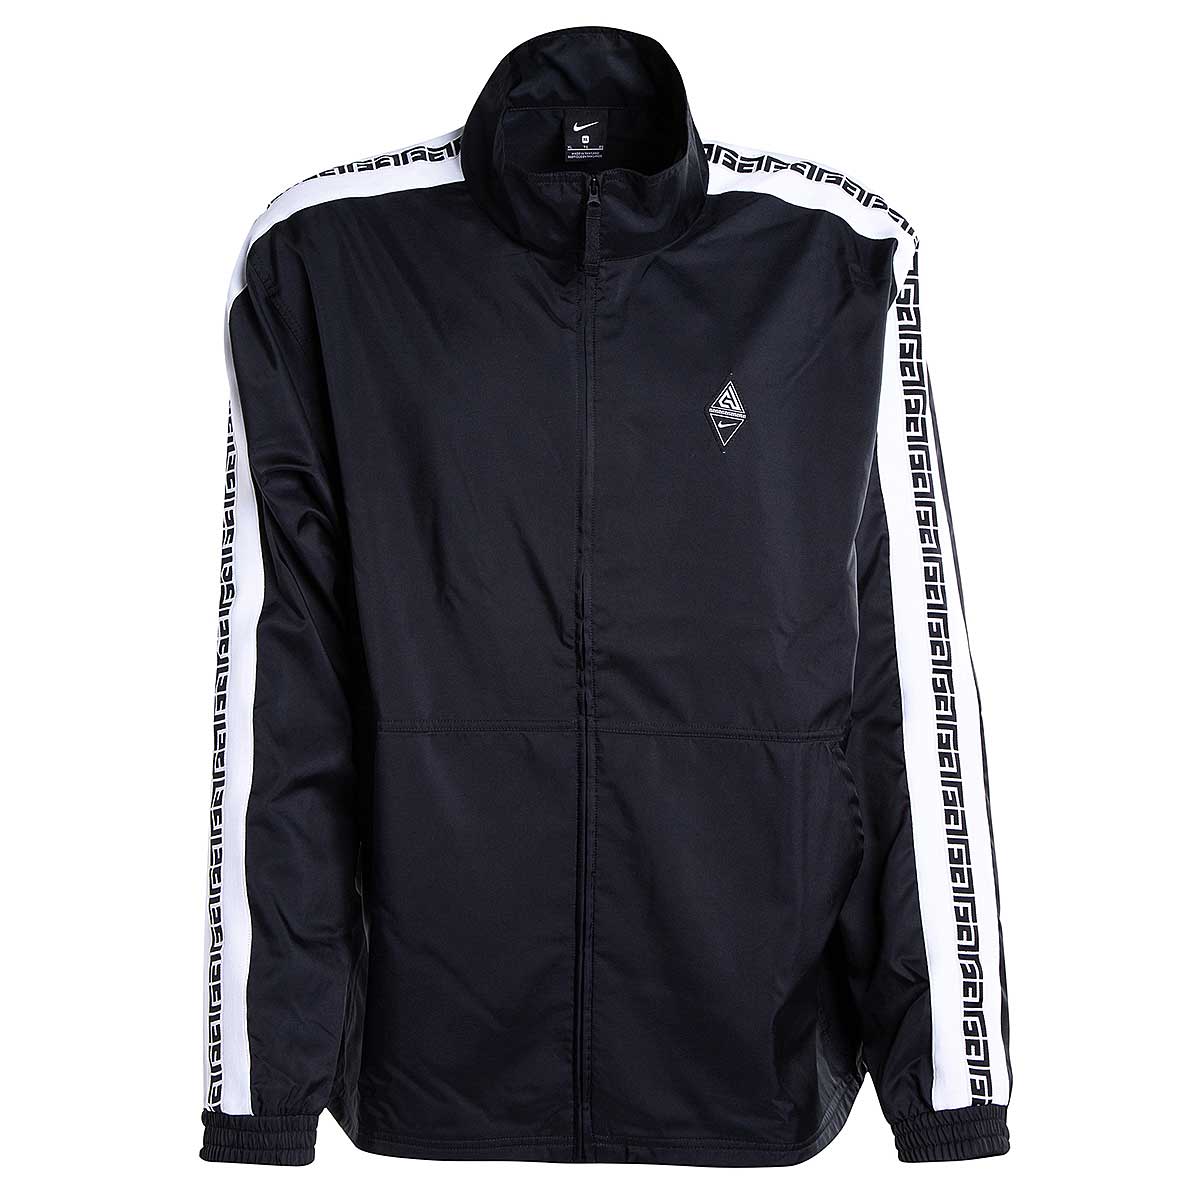 Buy GIANNIS M NK TRACK JACKET for N/A 0.0 | Kickz-DE-AT-INT